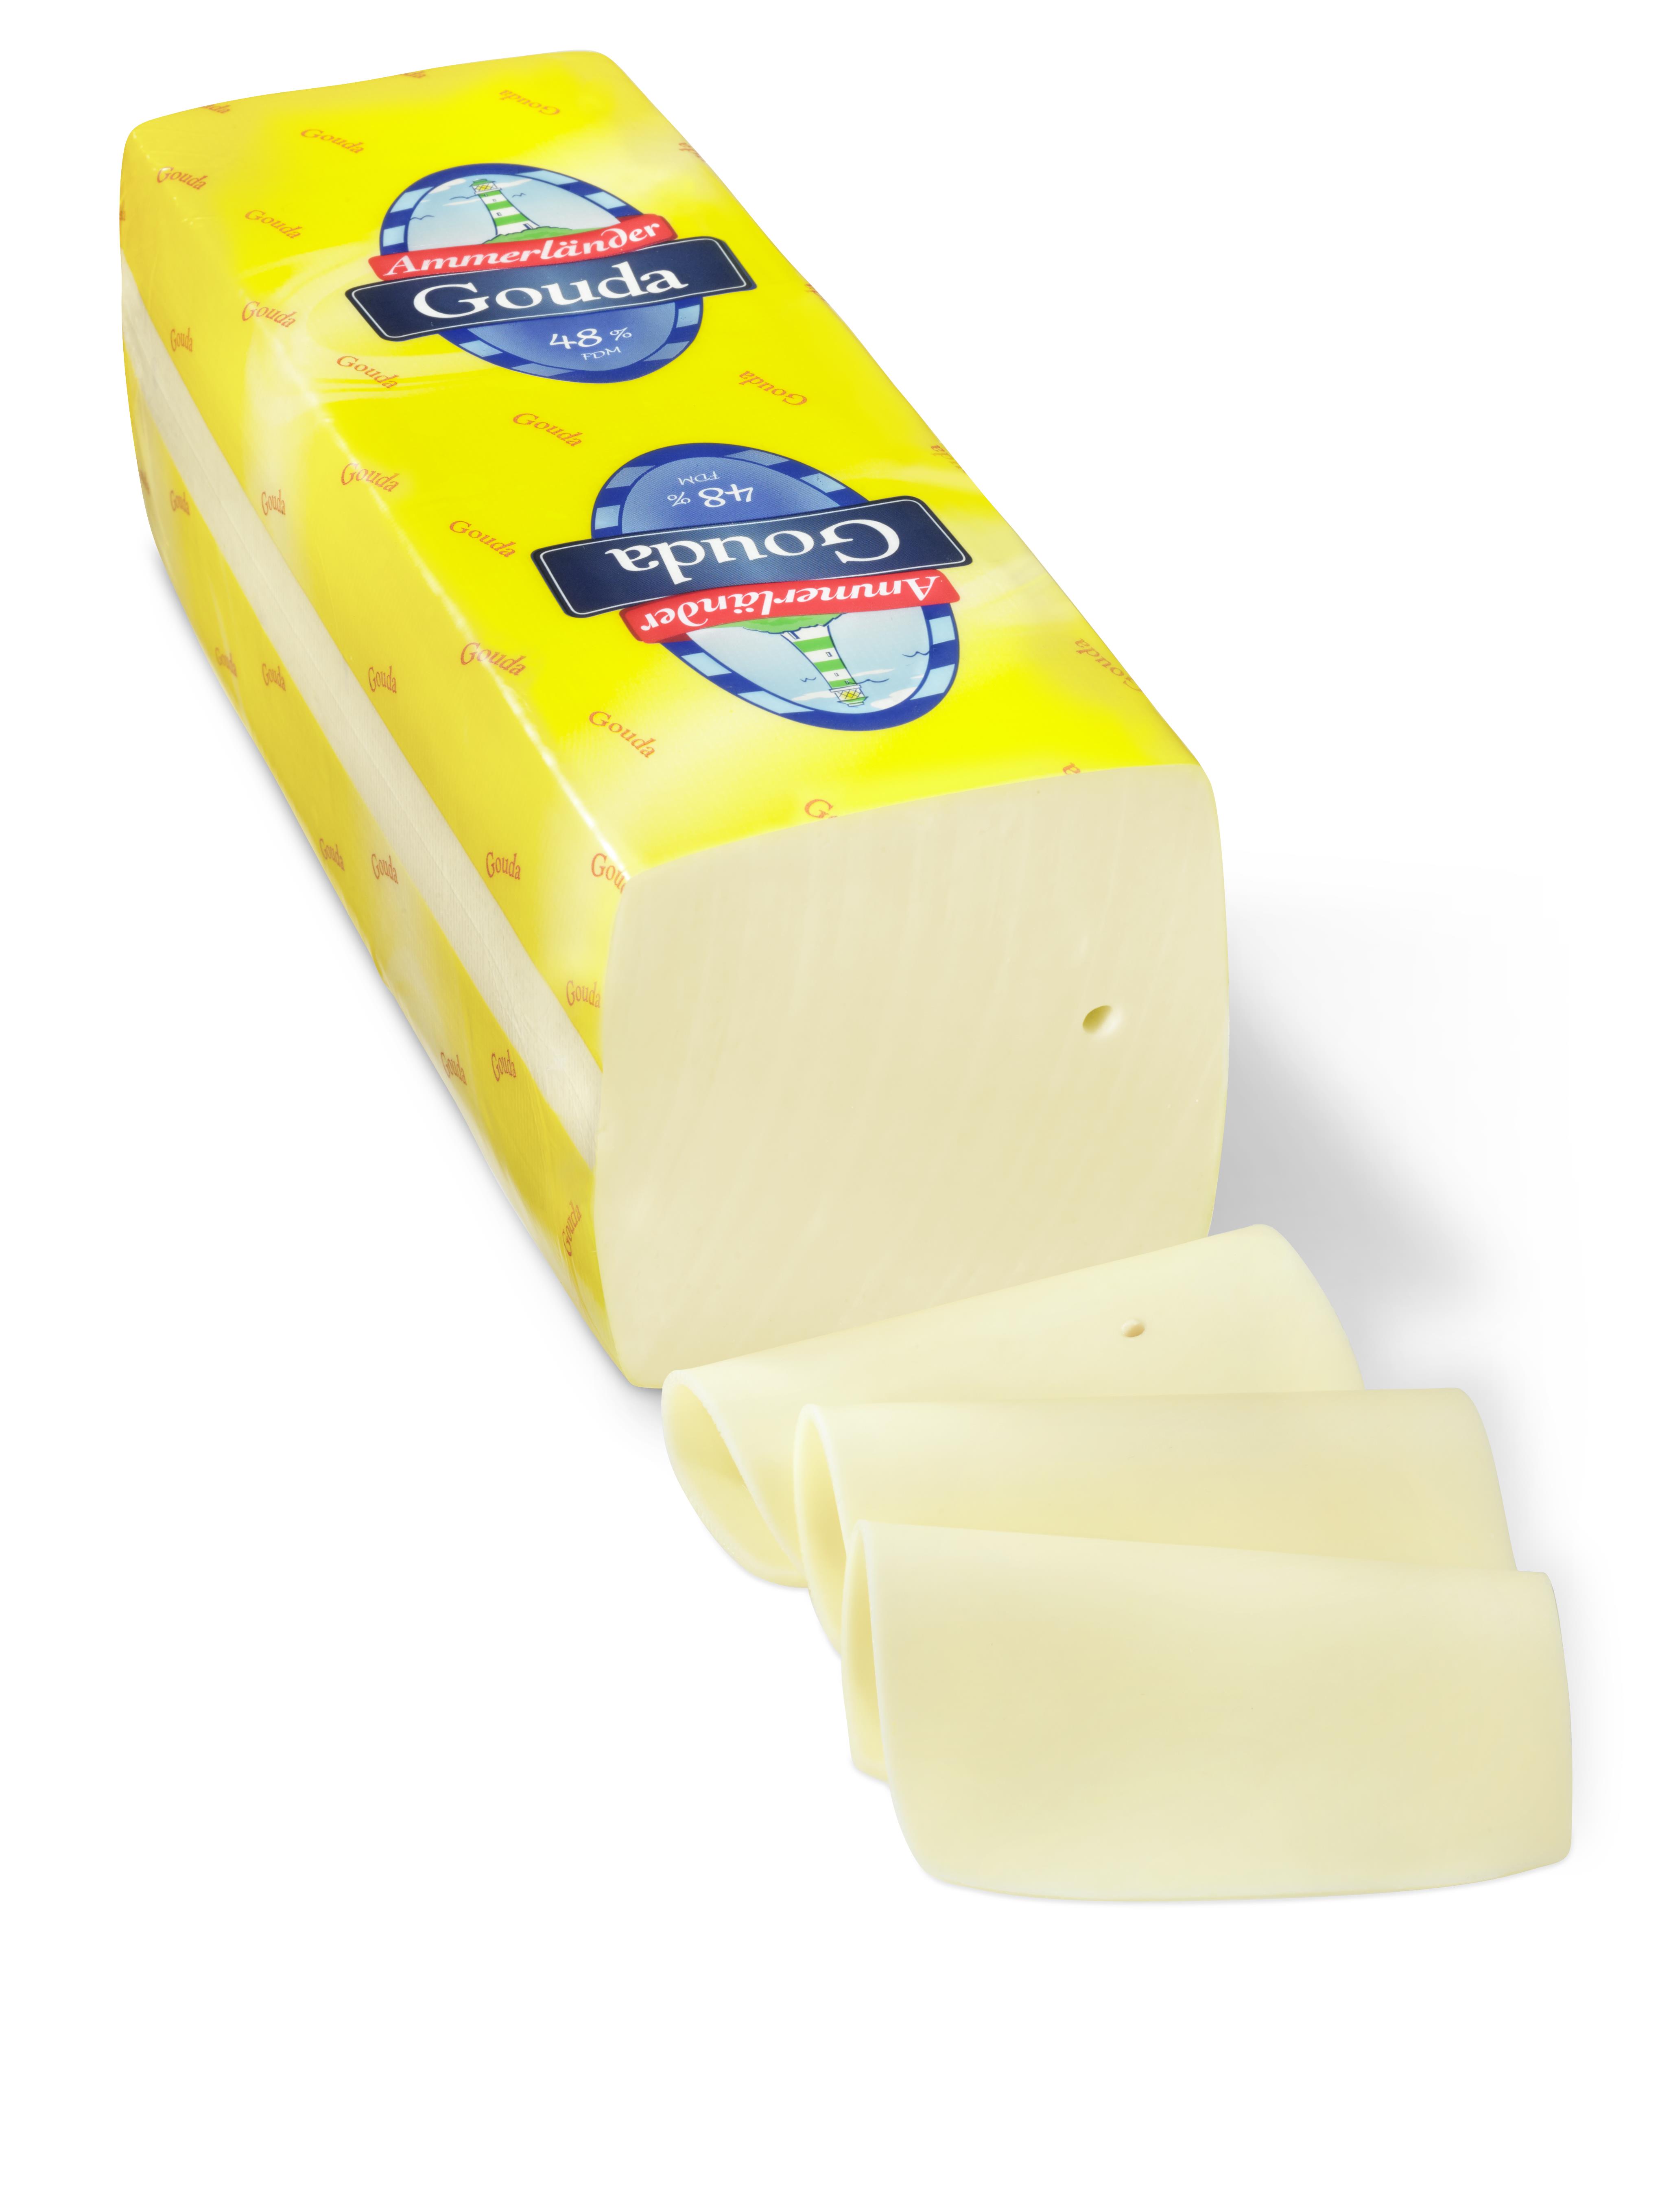 Gouda Cheese | Dairy | Products | Ambassador Foods